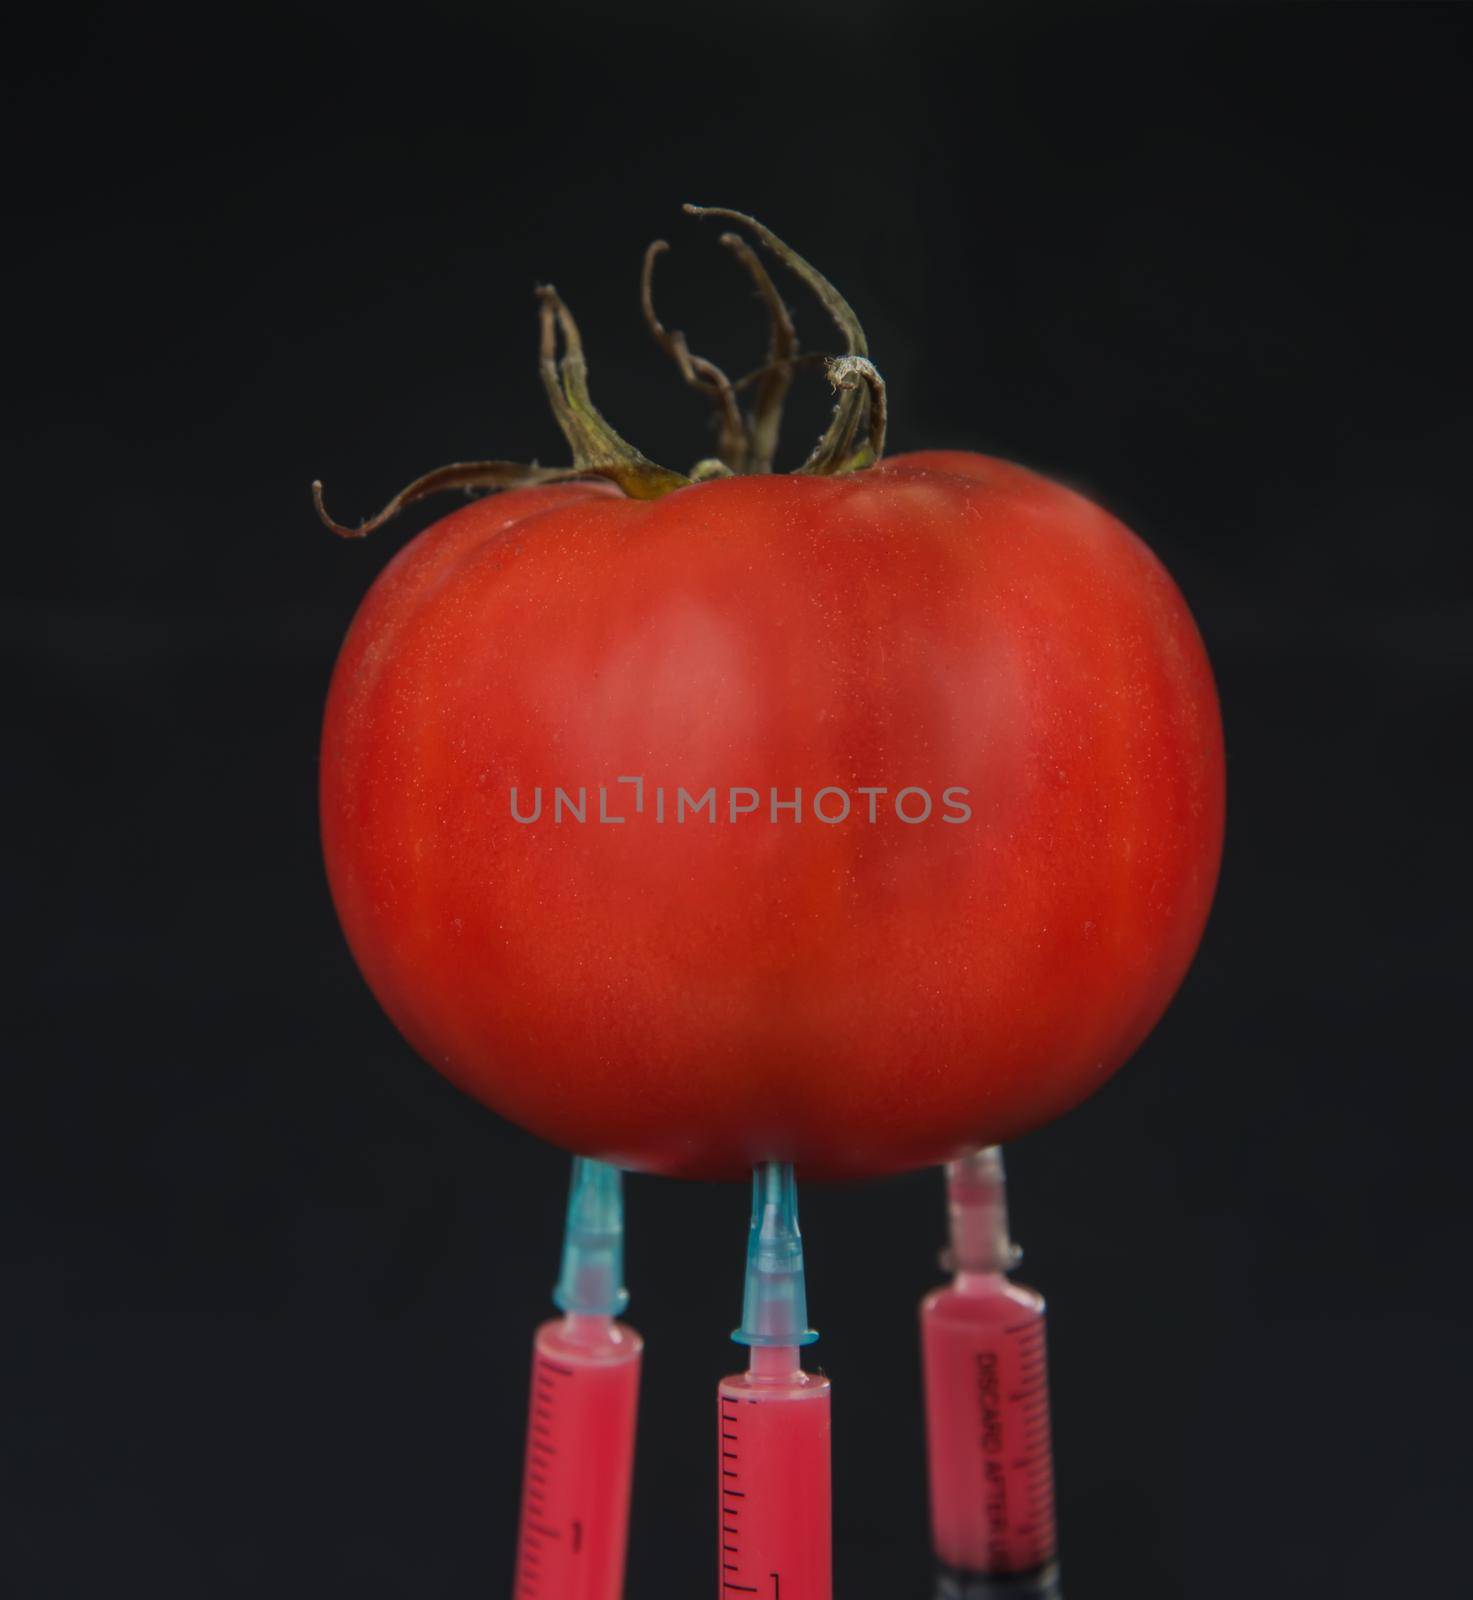 Red liquid in the syringe injected into tomato on a black background, close-up